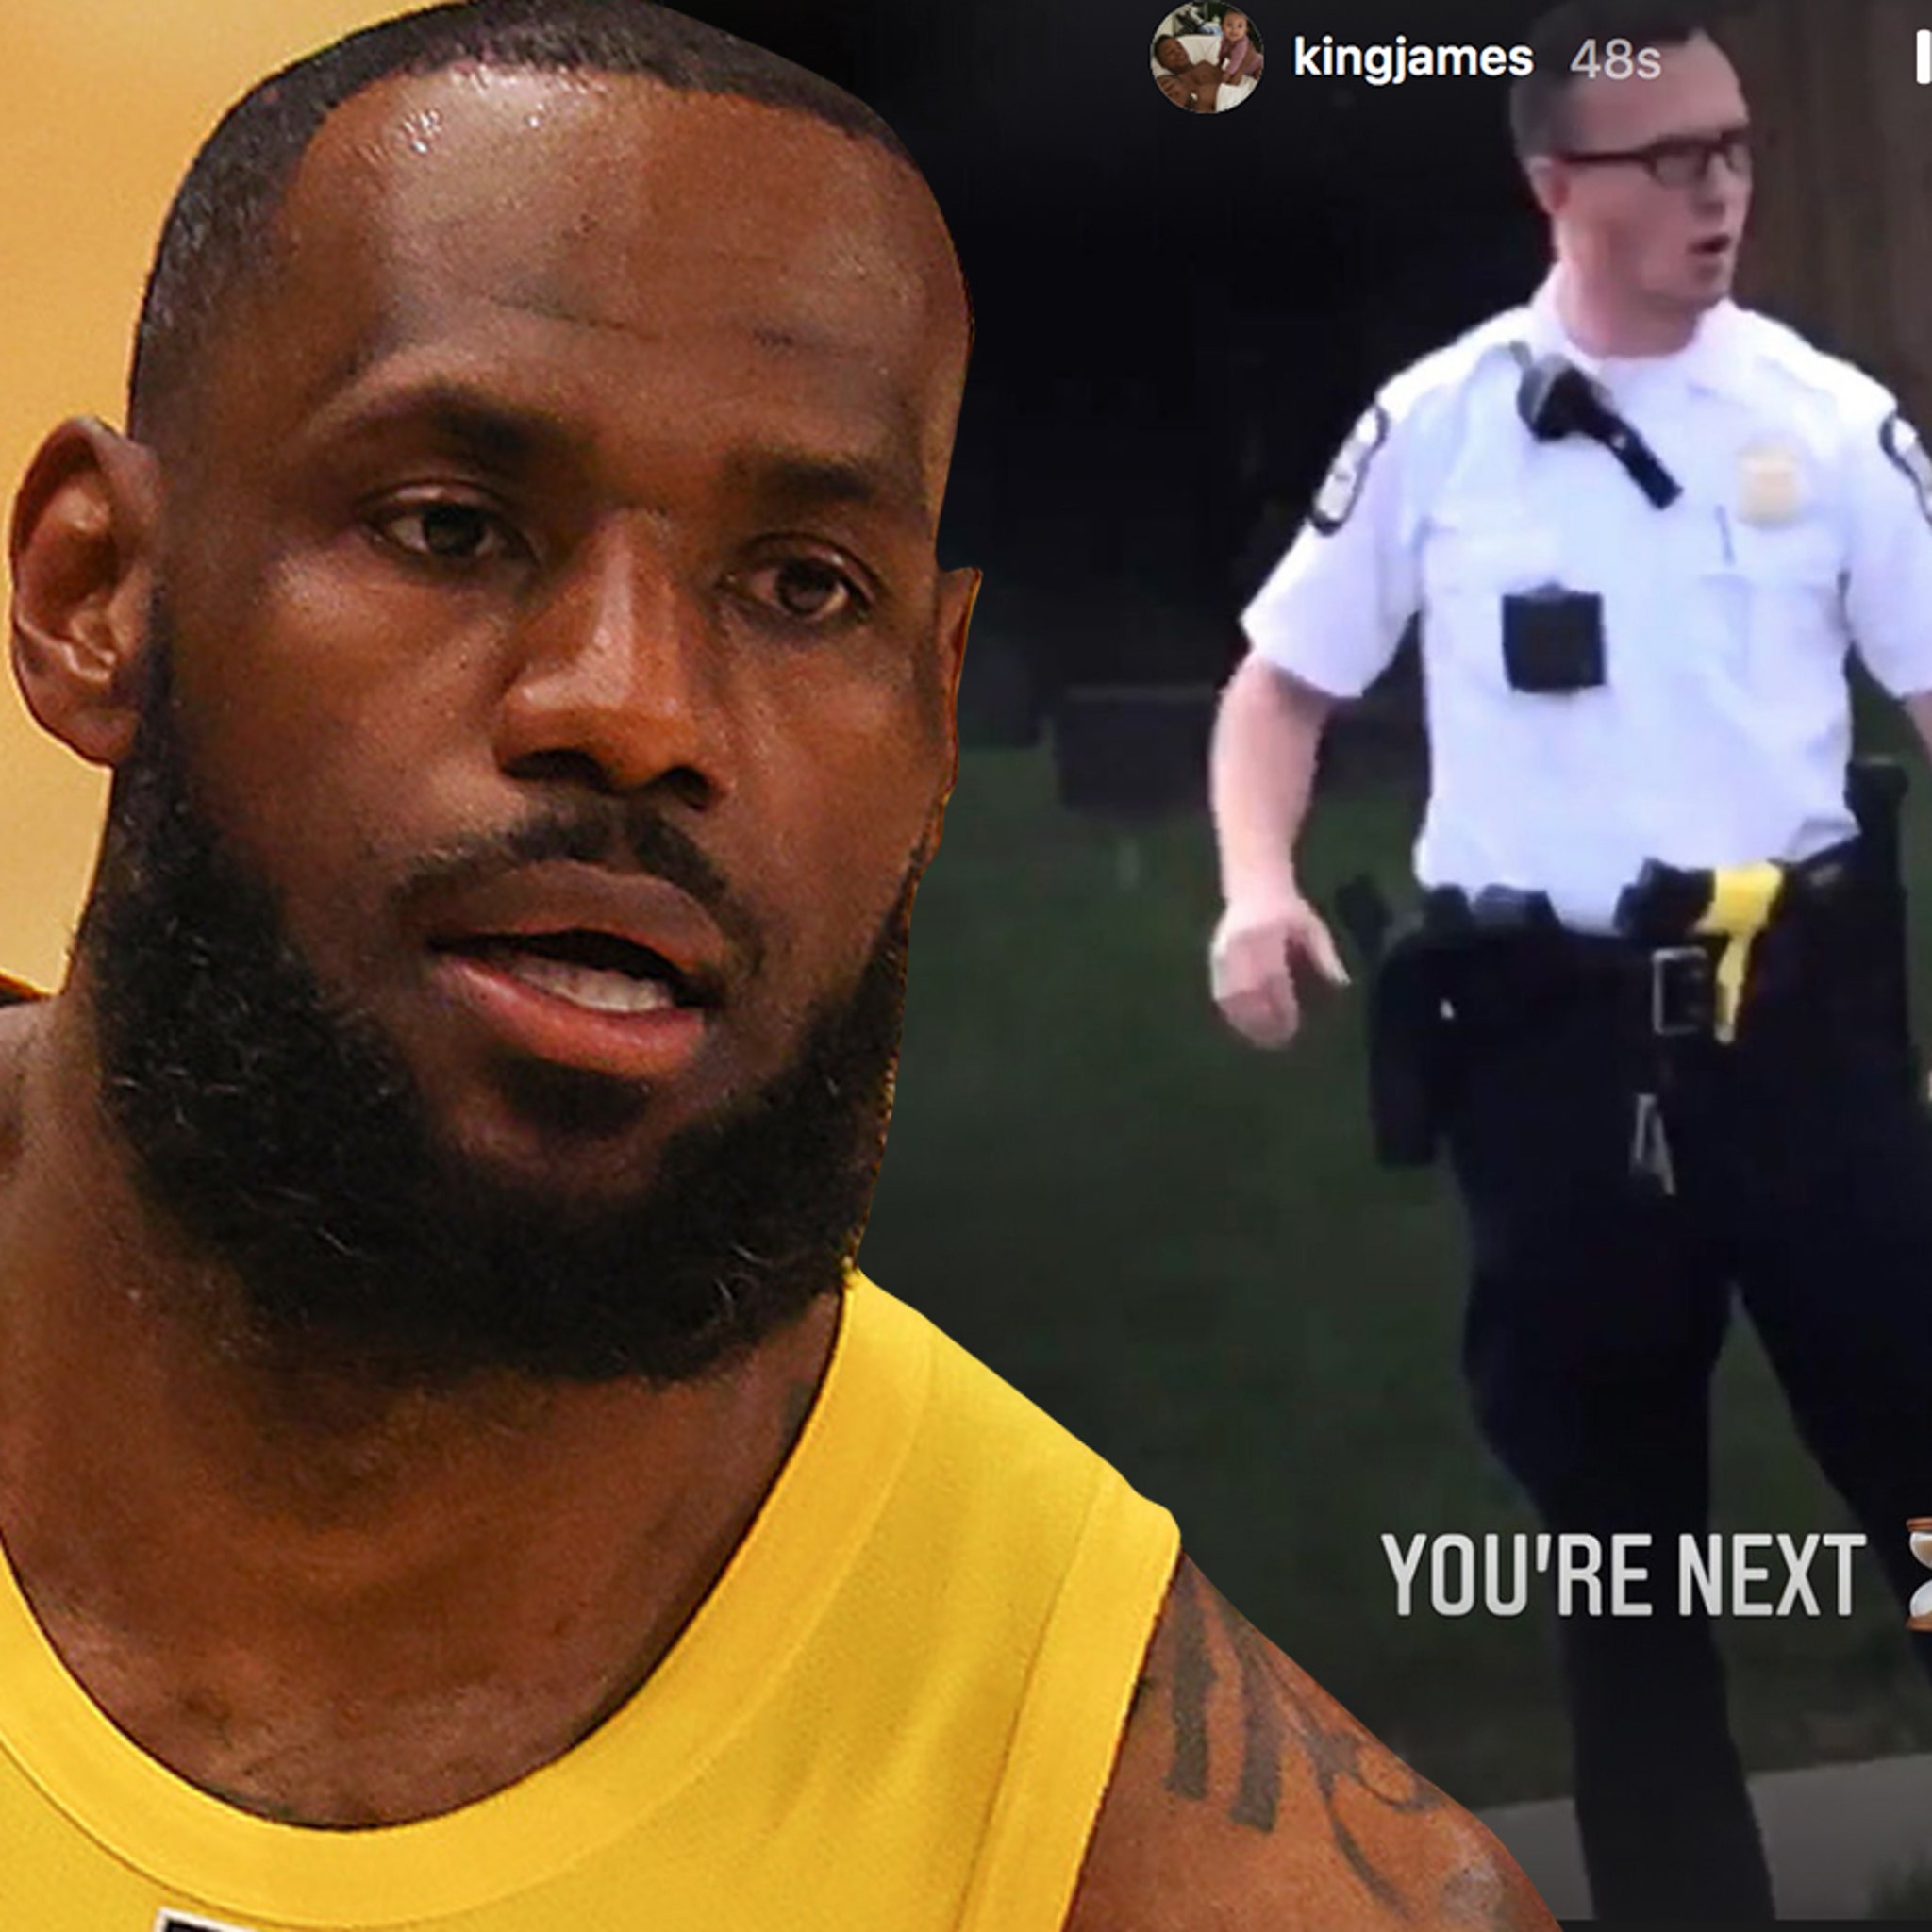 LeBron James Under Fire For 'You're Next' Post, 'Disgraceful And Dangerous'